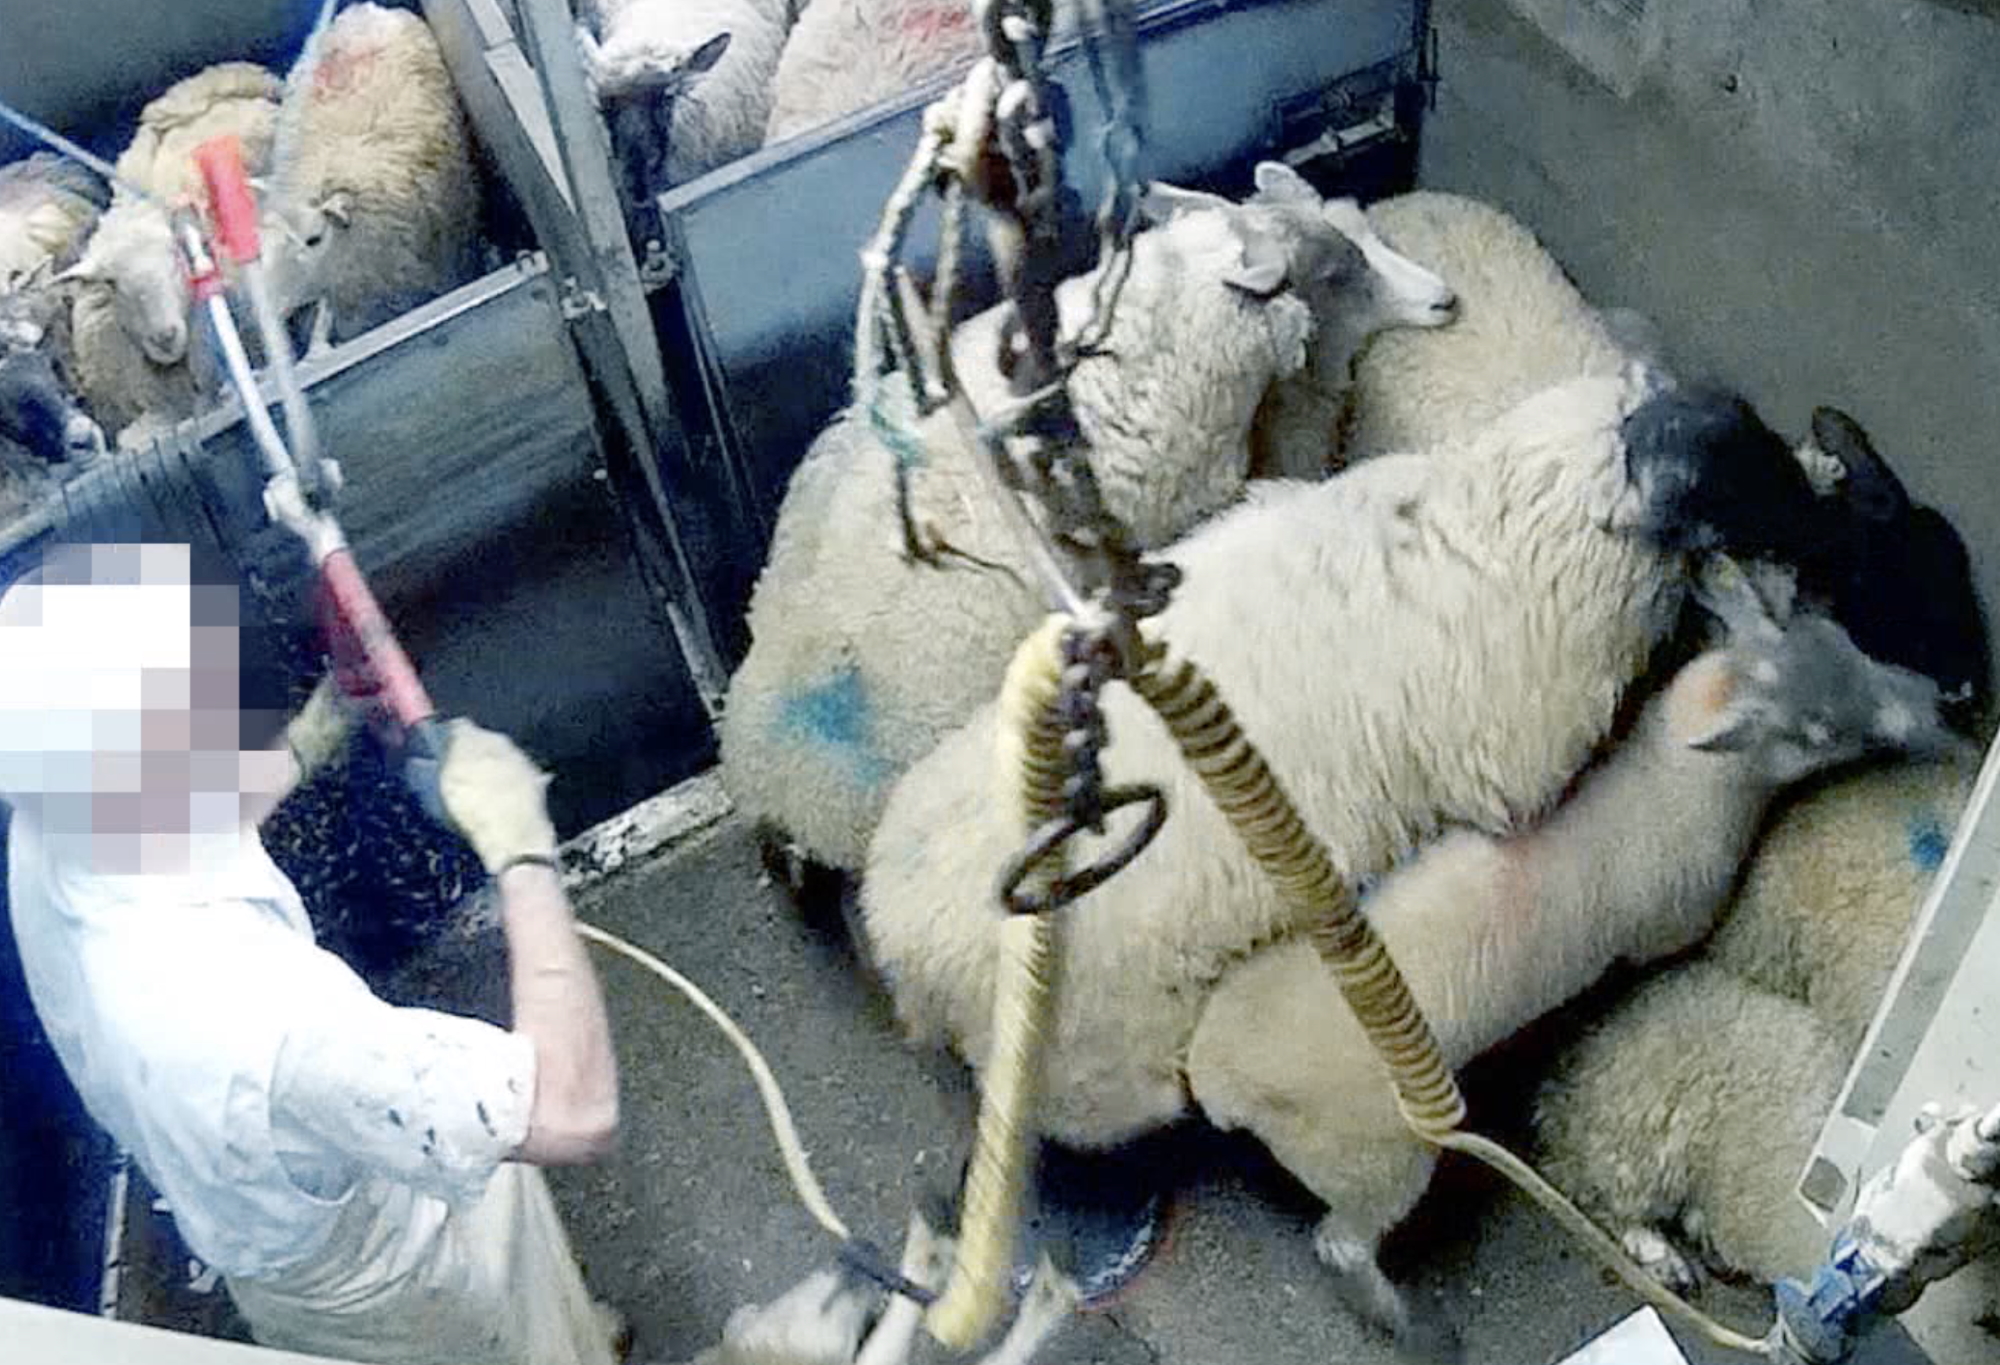 Cruelty case against Forge Farm slaughterhouse has been dropped - Animal Aid